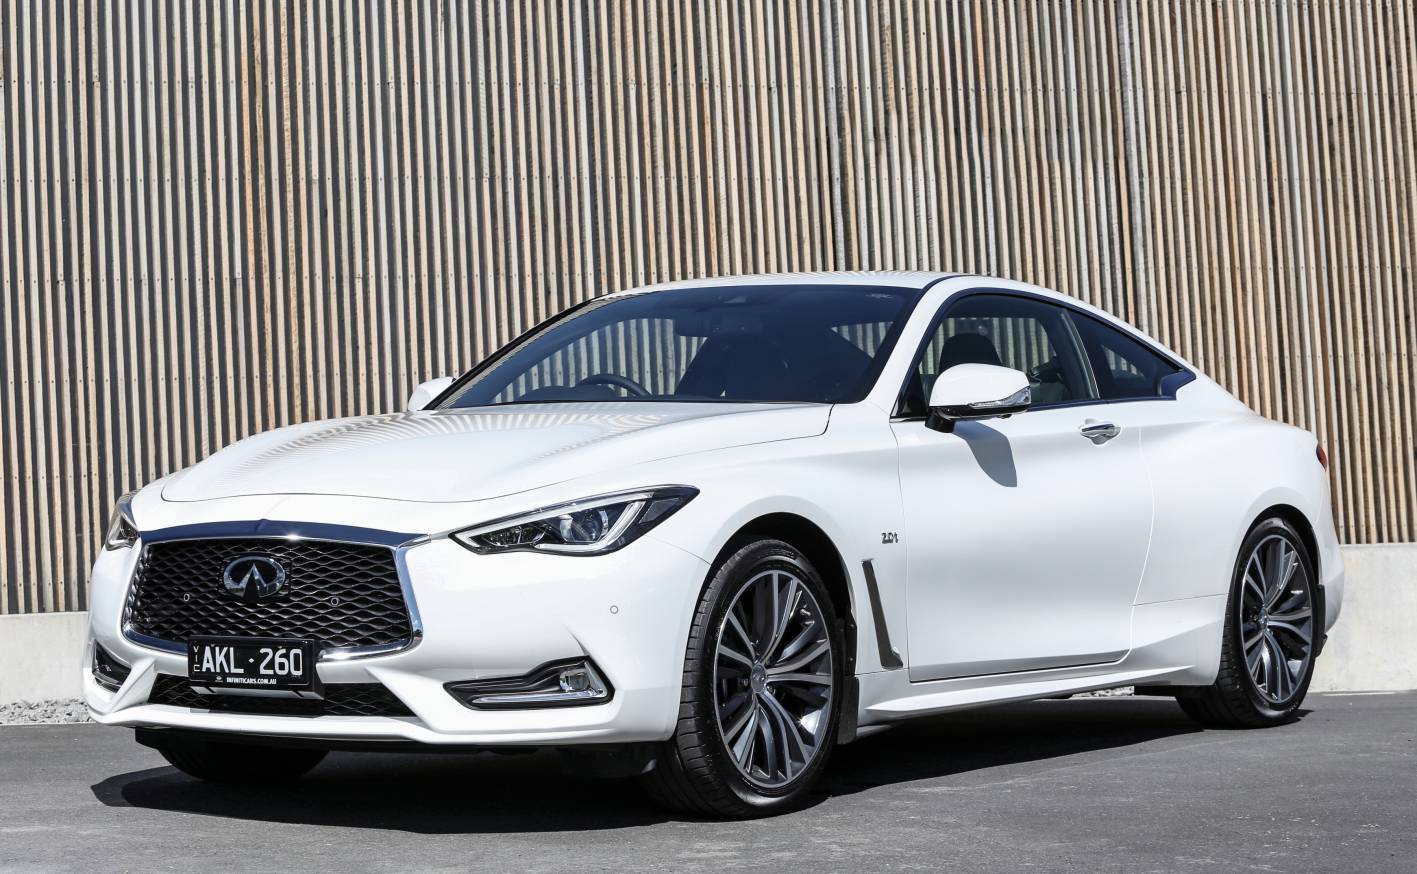 All-new 2017 Infiniti Q60 checks in from $62,900 - ForceGT.com